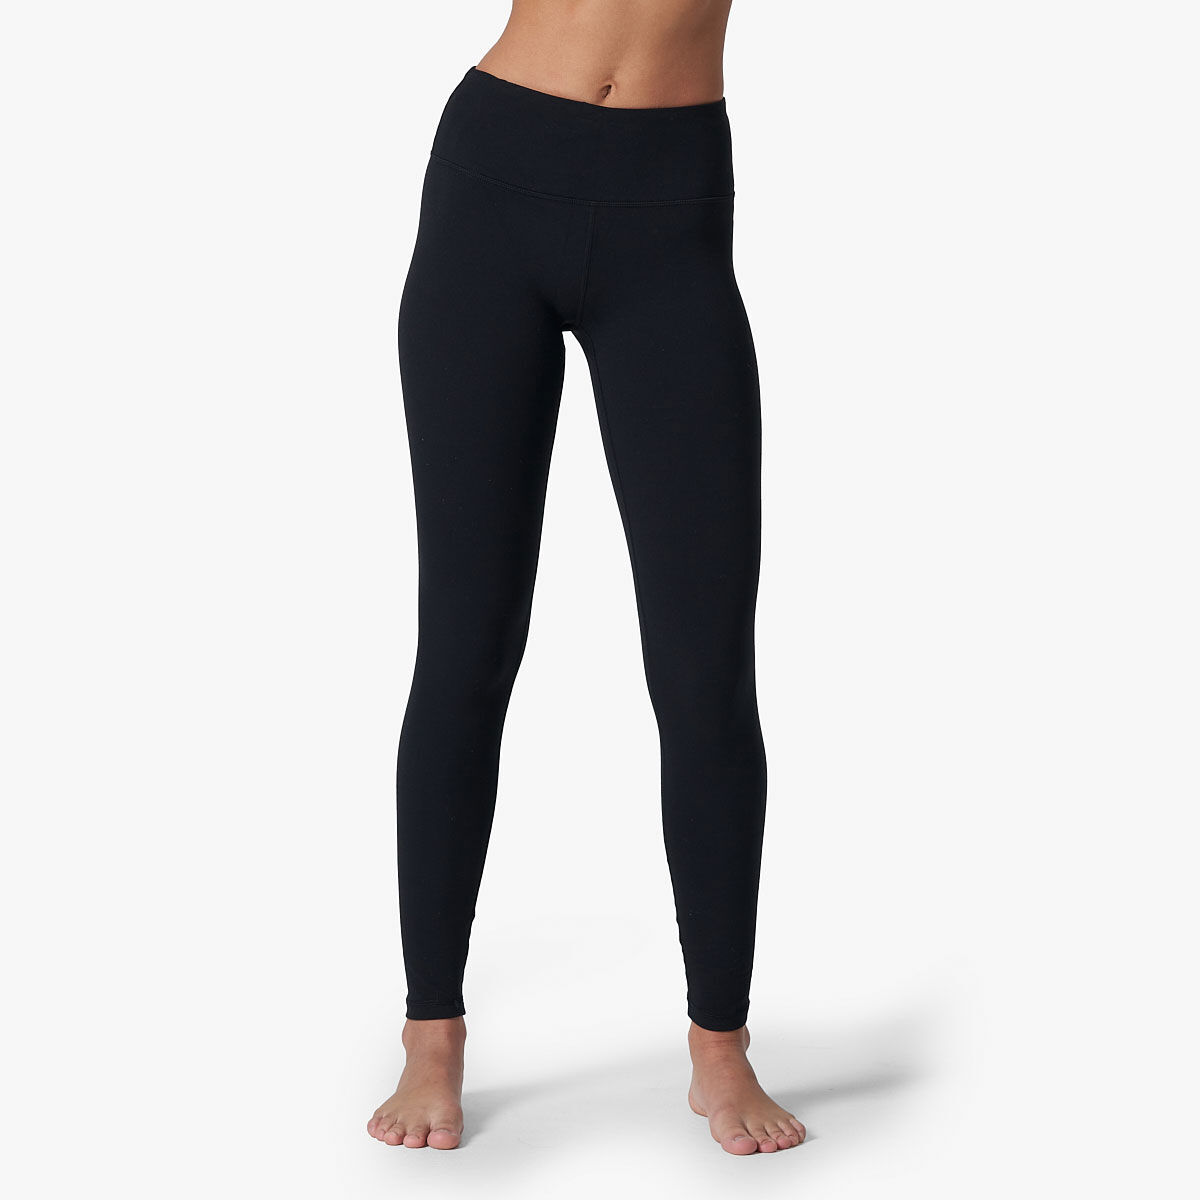 rebel sport - The Ell N Voo tights will make sure you're